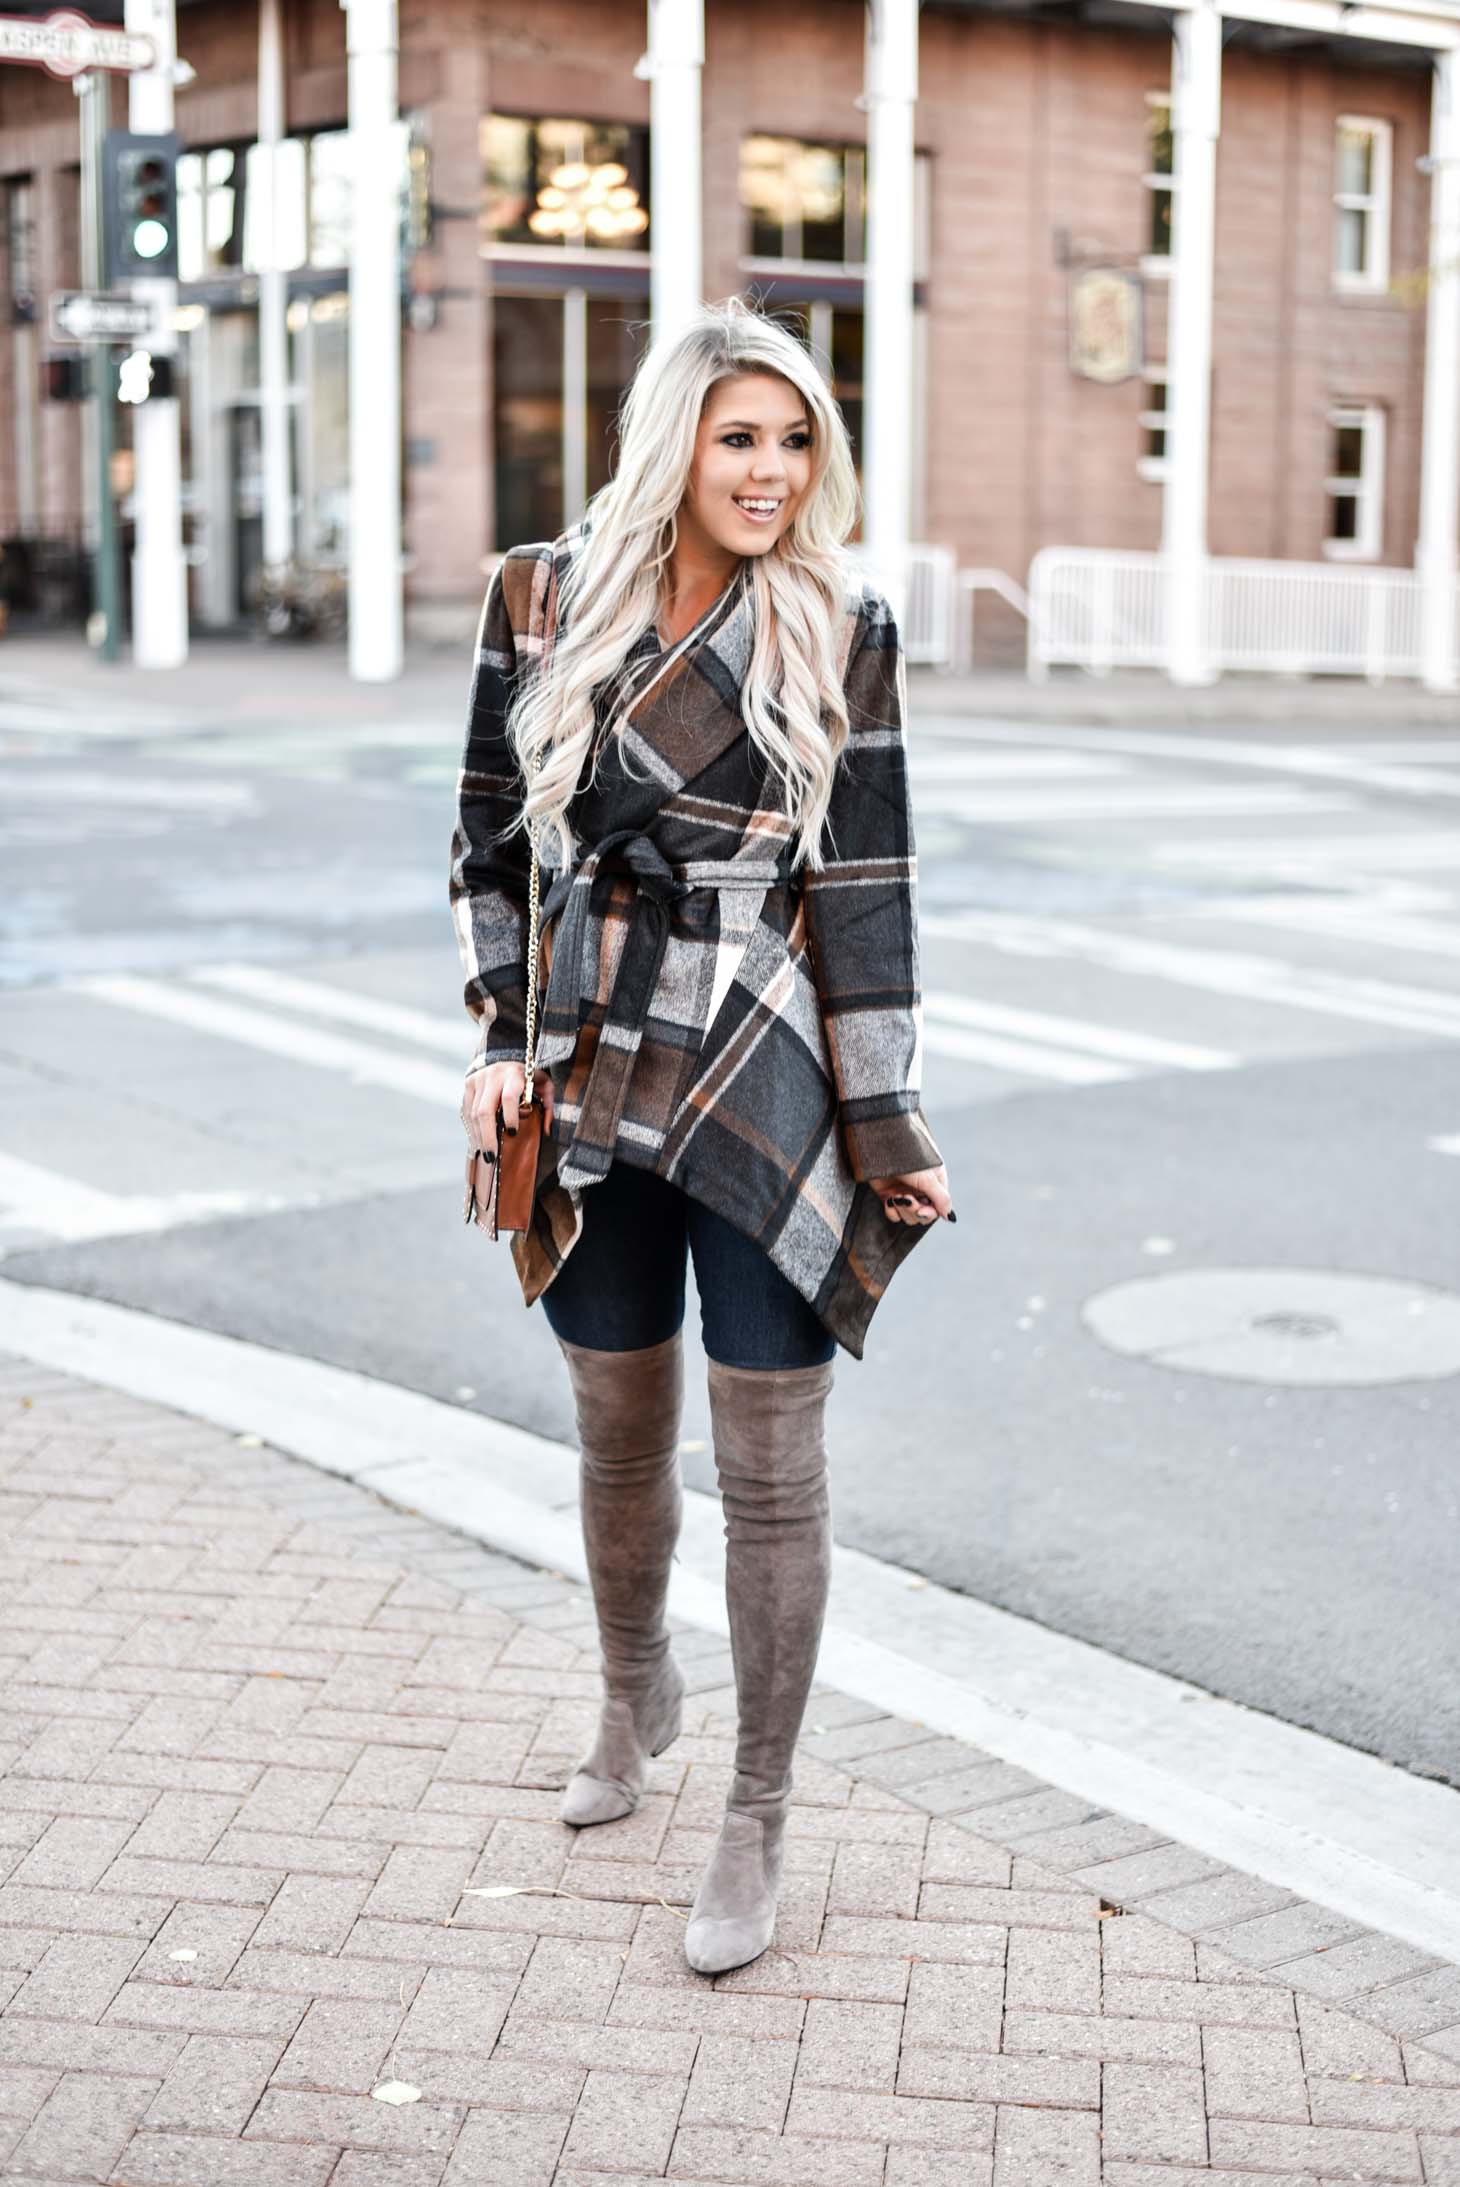 Erin Elizabeth of Wink and a Twirl shares the cutest plaid coat from Chicwish